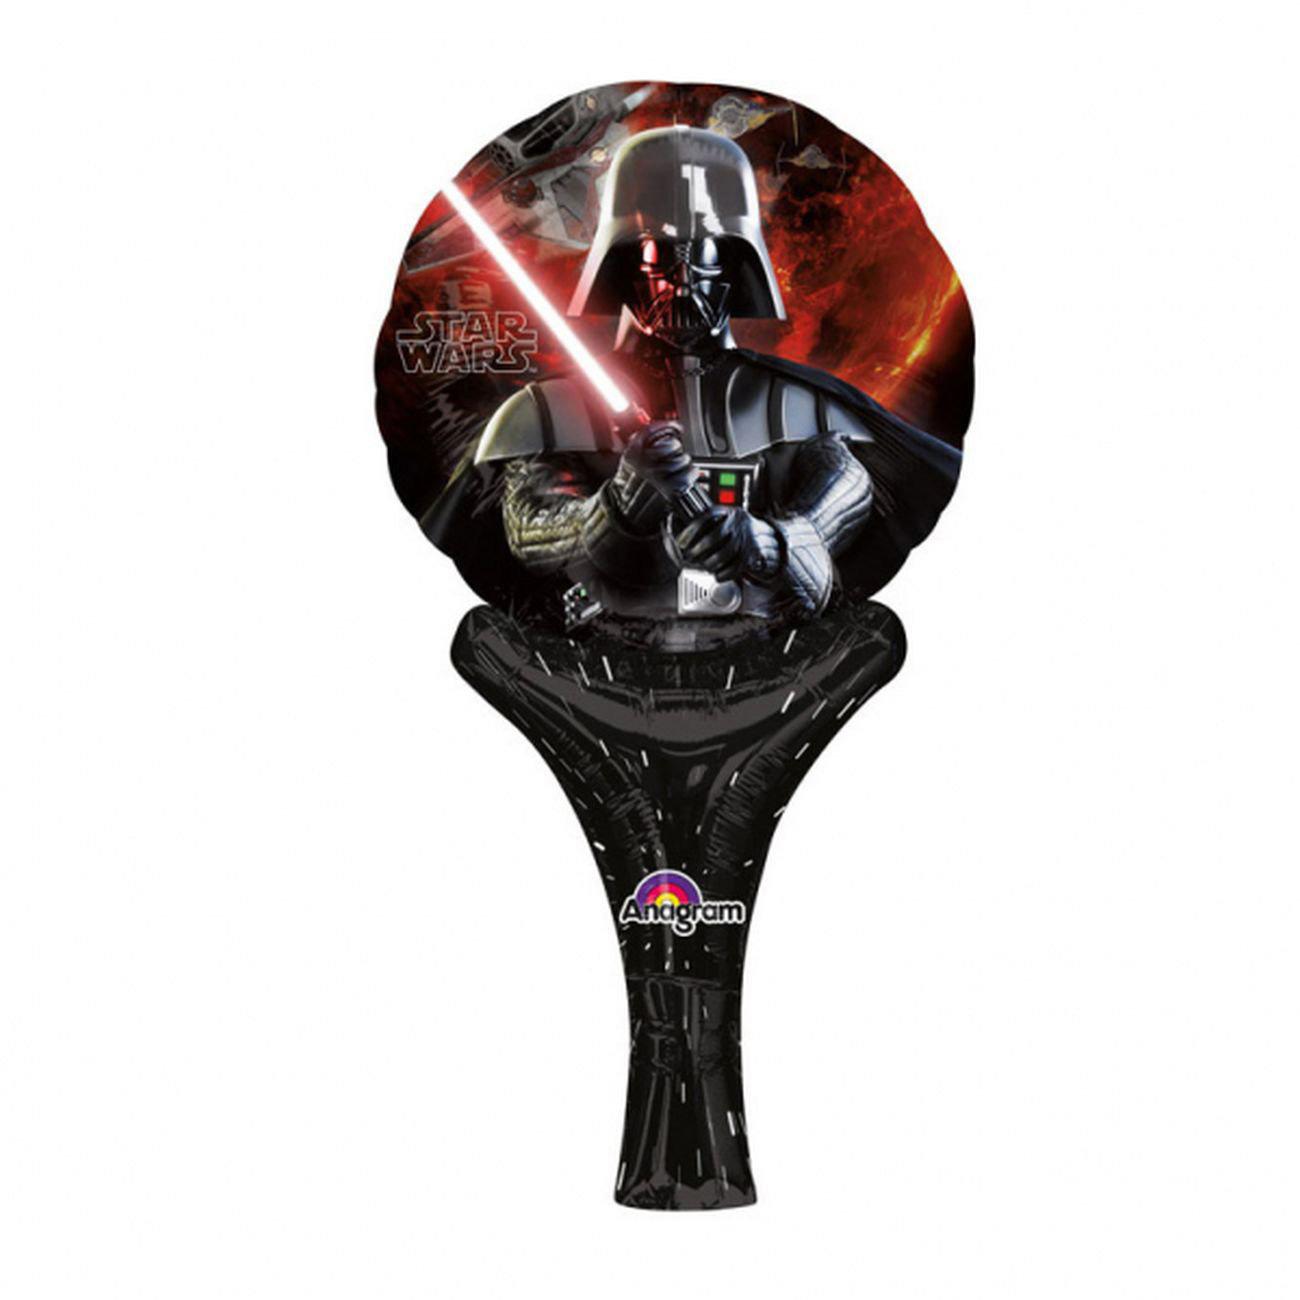 Star Wars Inflate-a-Fun Foil Balloon 12in Balloons & Streamers - Party Centre